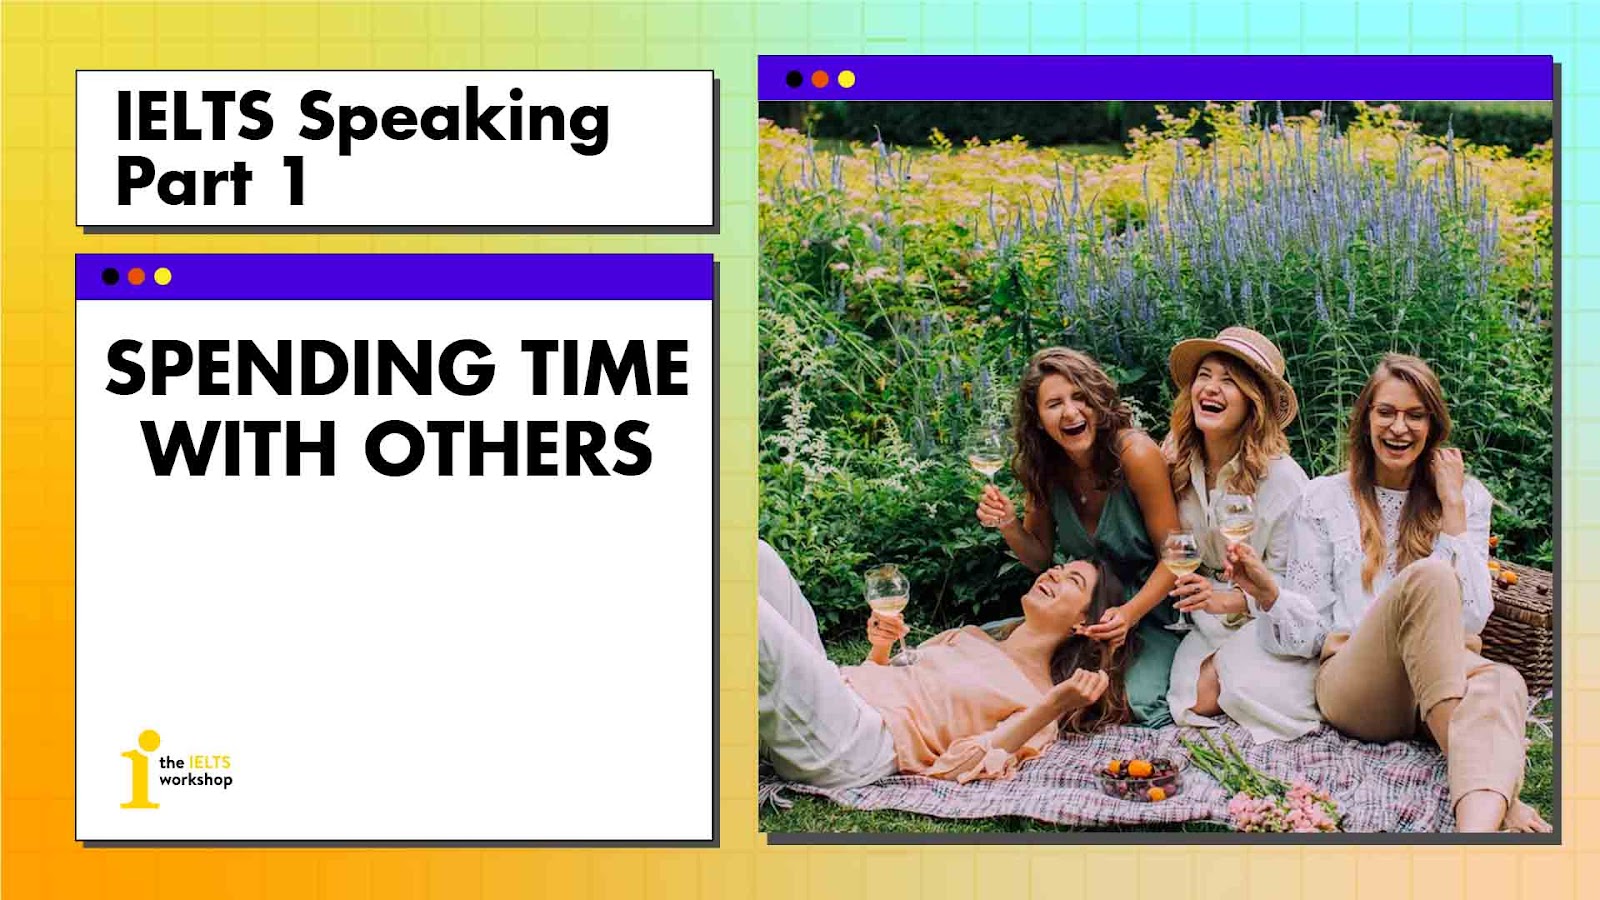 ielts speaking part 1 spending time with others